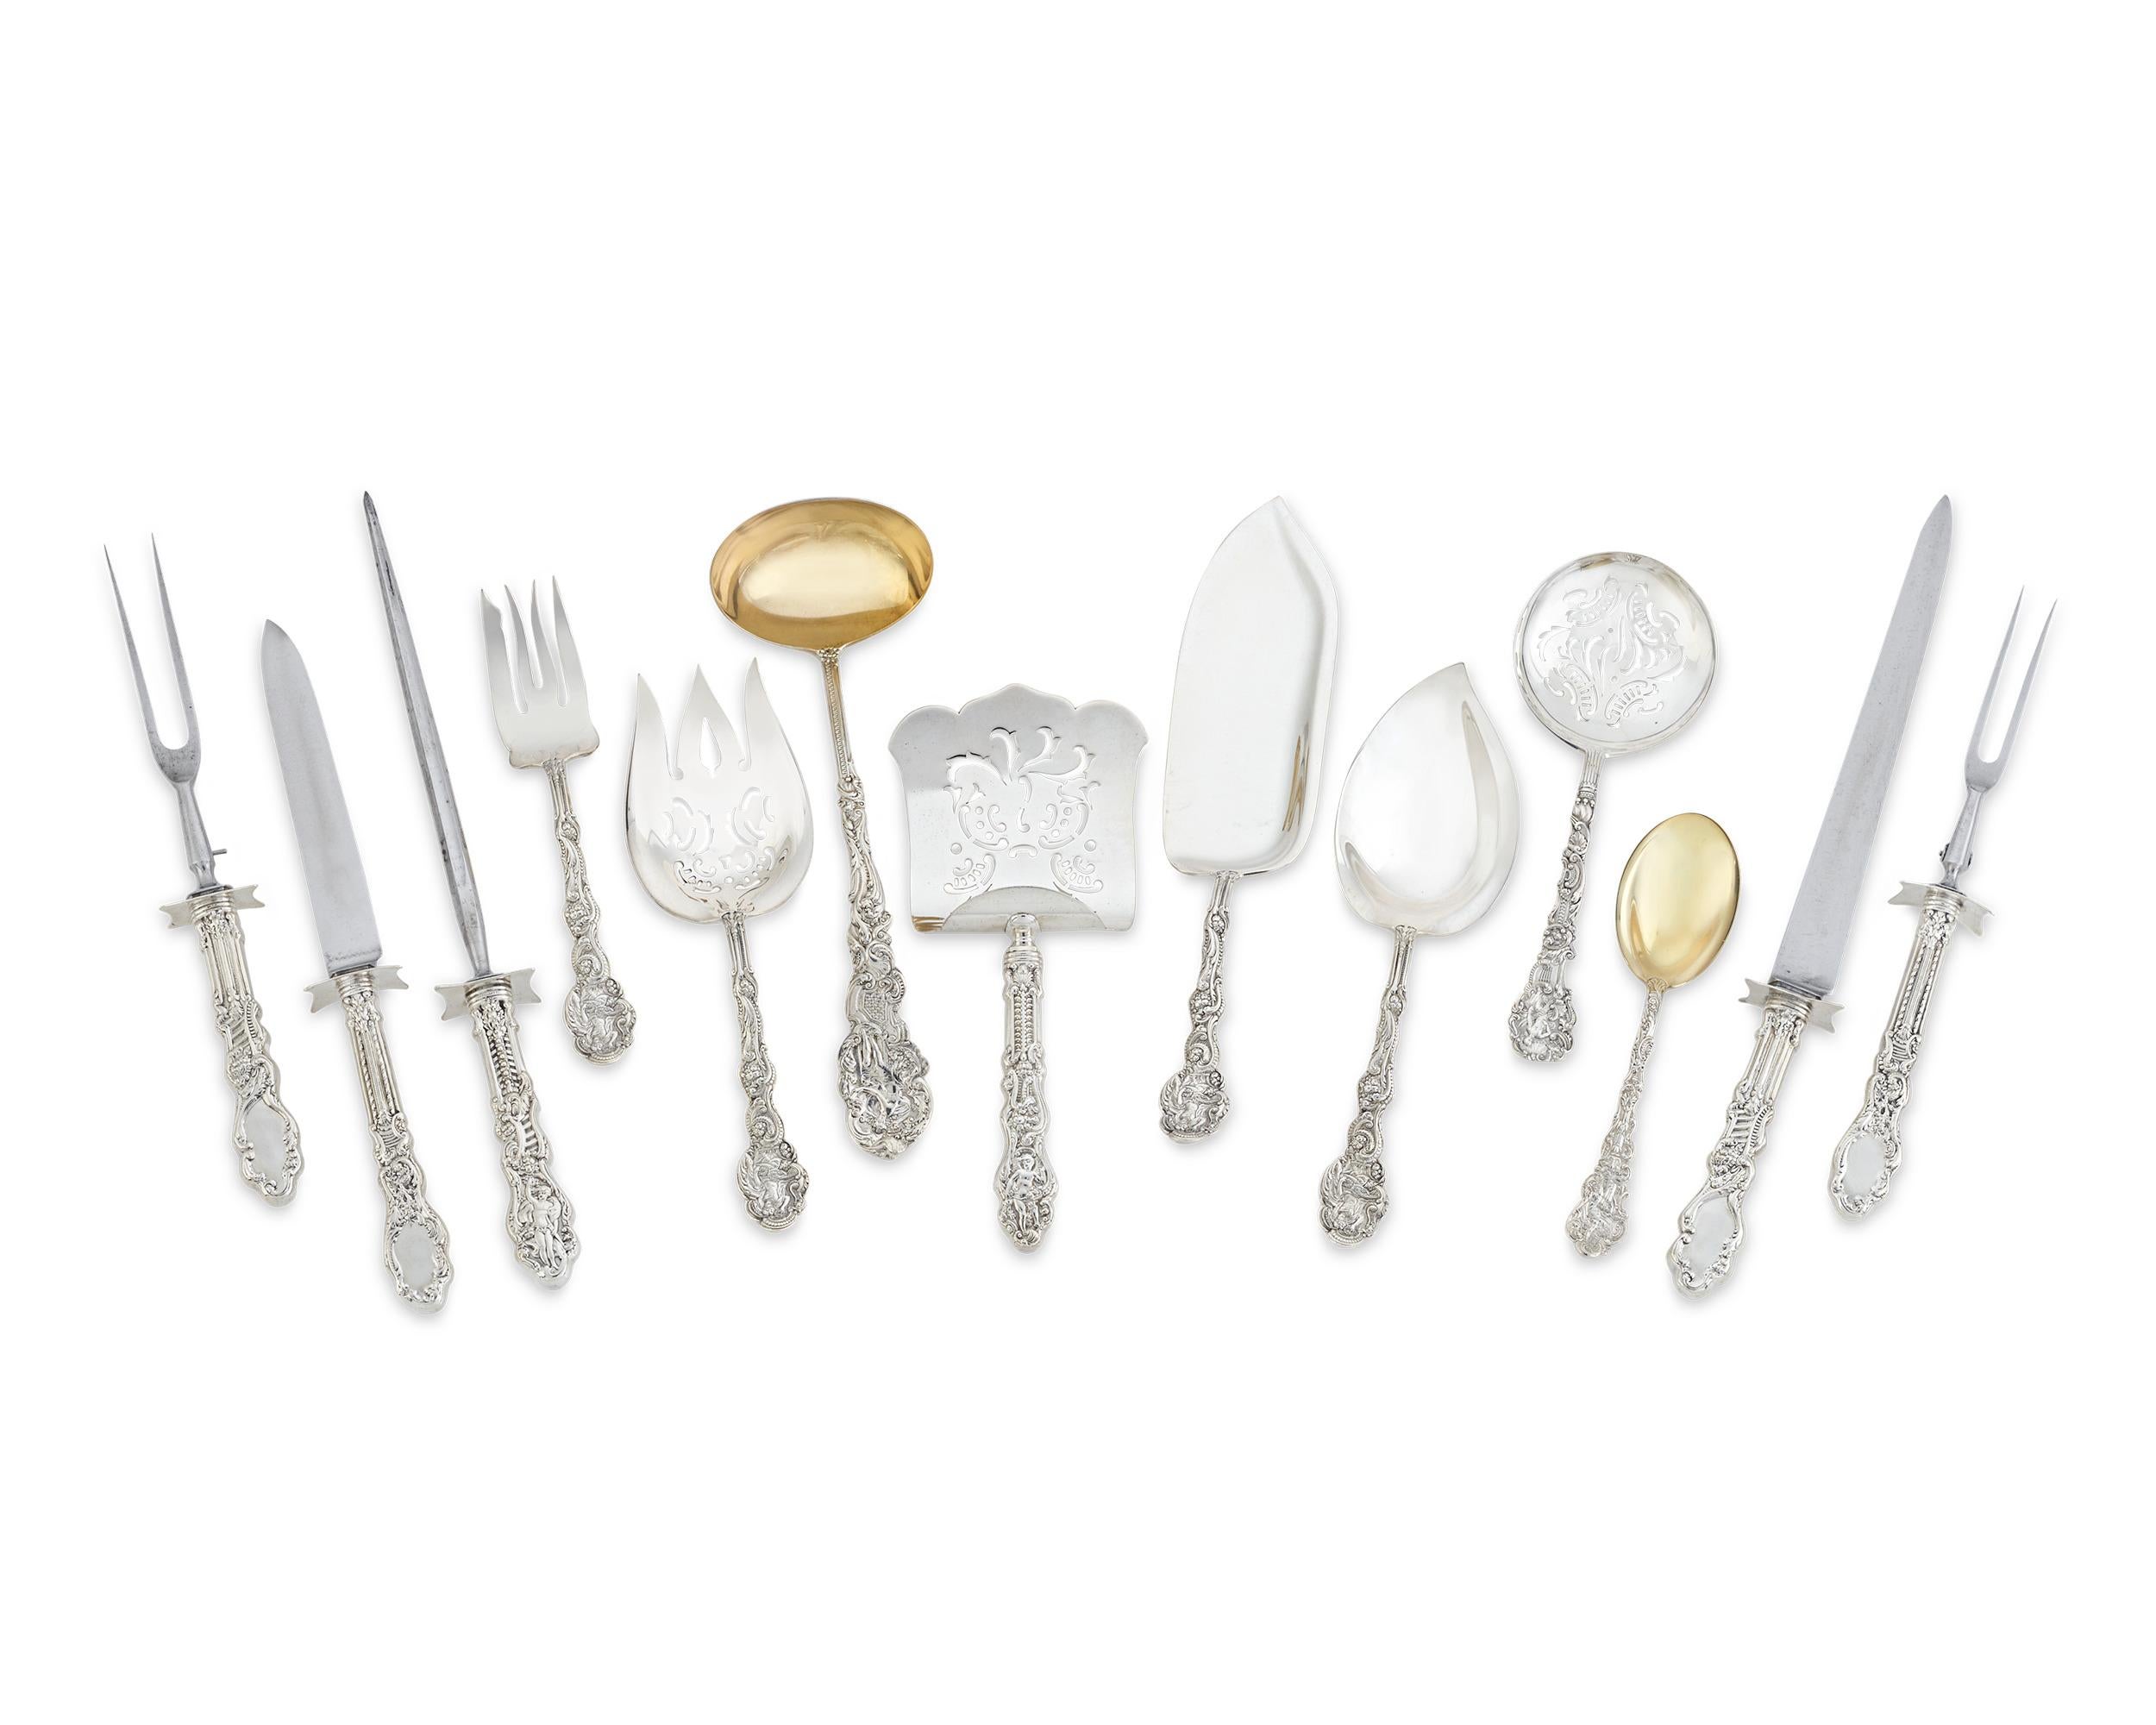 American Gorham Sterling Silver Flatware Service, 705 Pieces For Sale